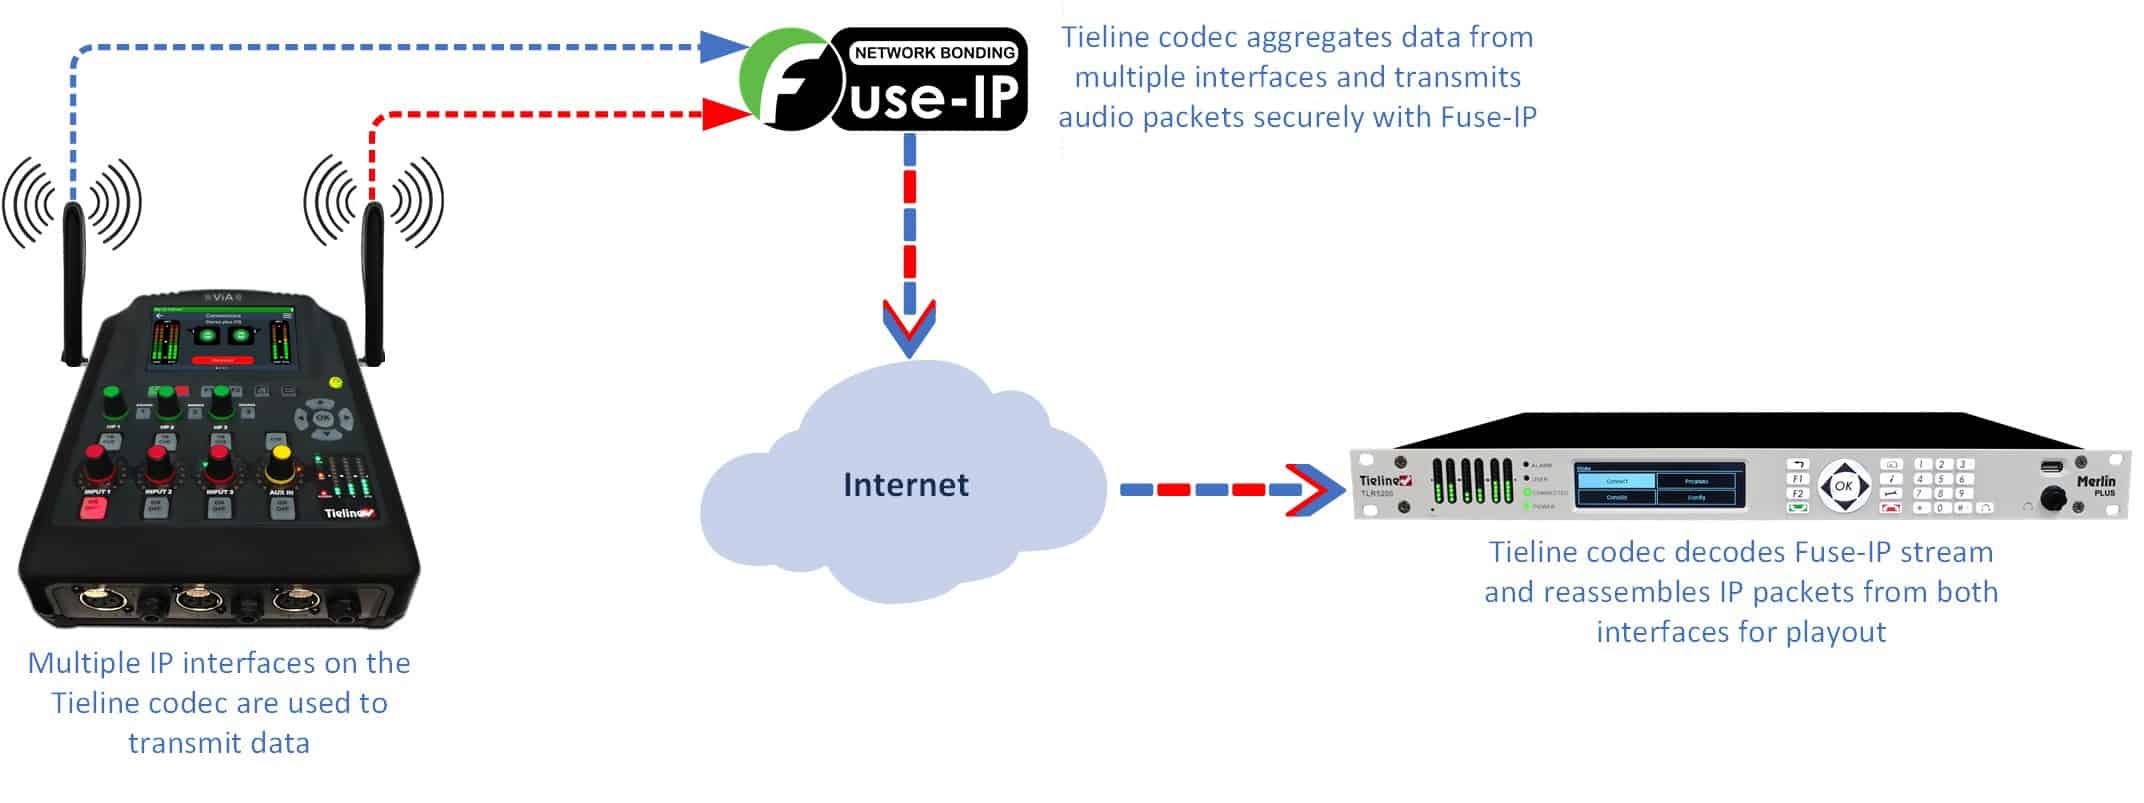 How Fuse-IP works